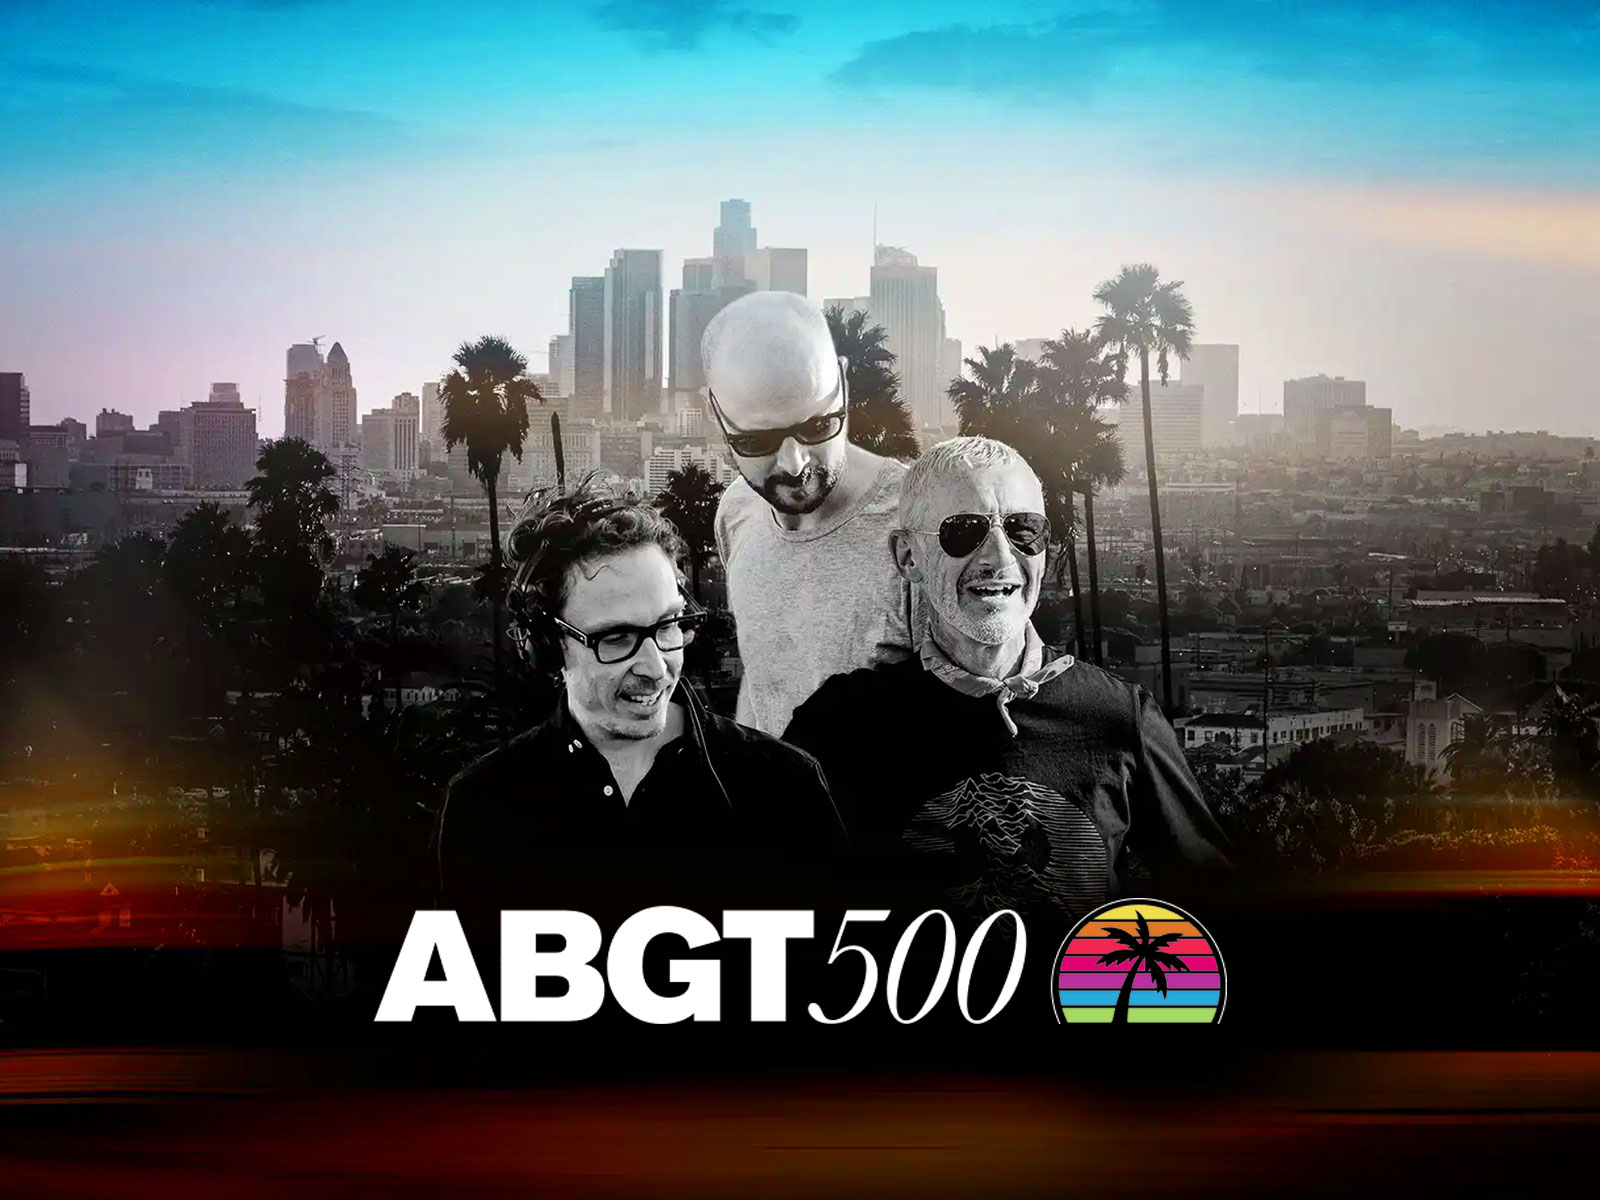 abgt-500-group-therapy-500-los-angeles-oz-edm-feature